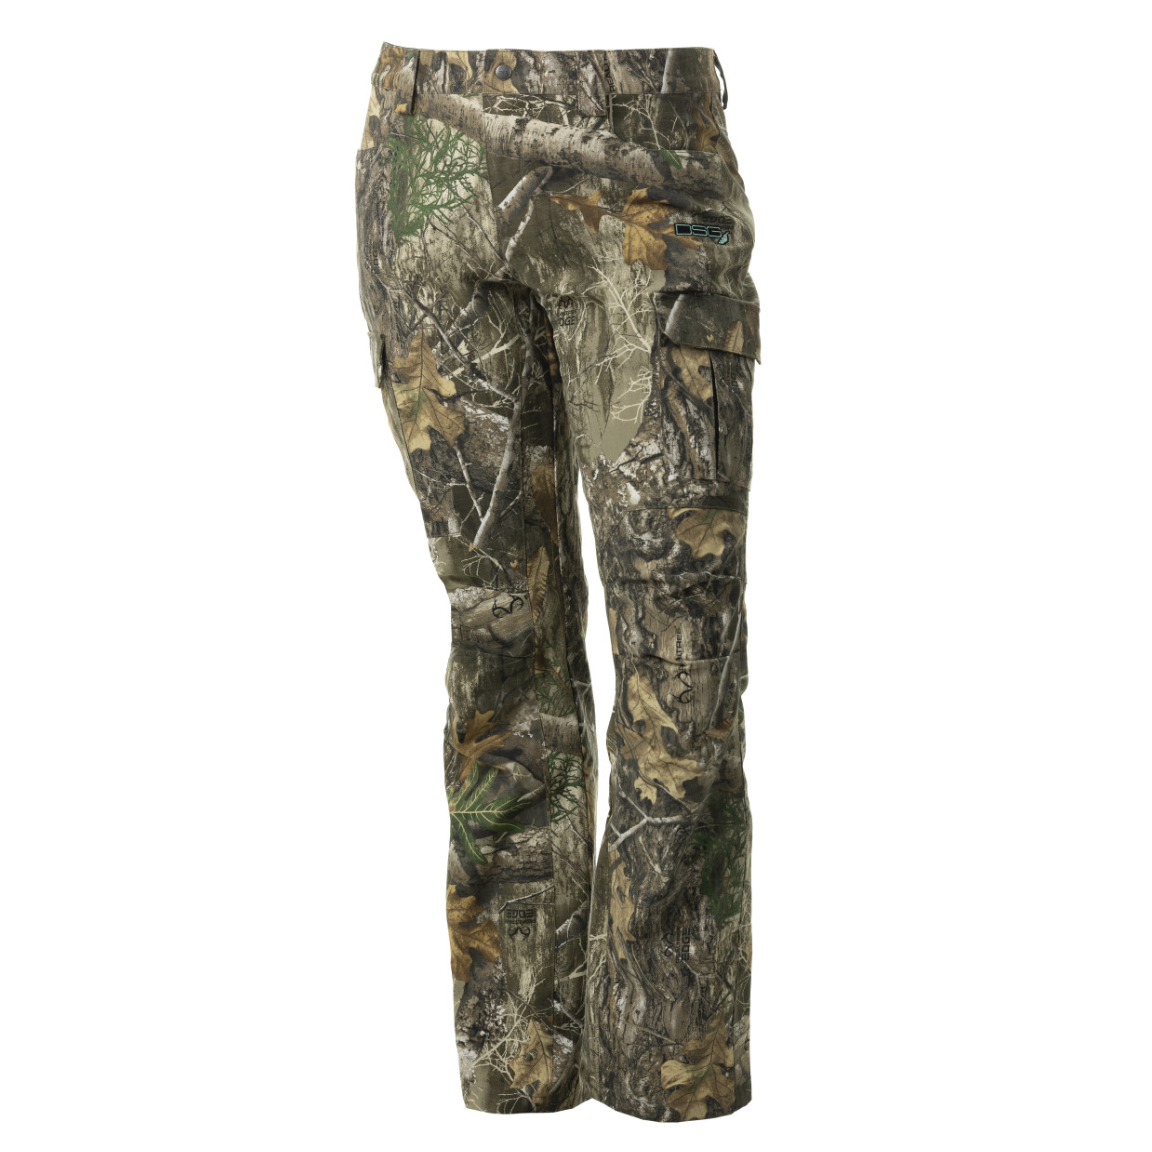 DSG Outerwear Foraging Legging - Women's, Extra Small, Realtree